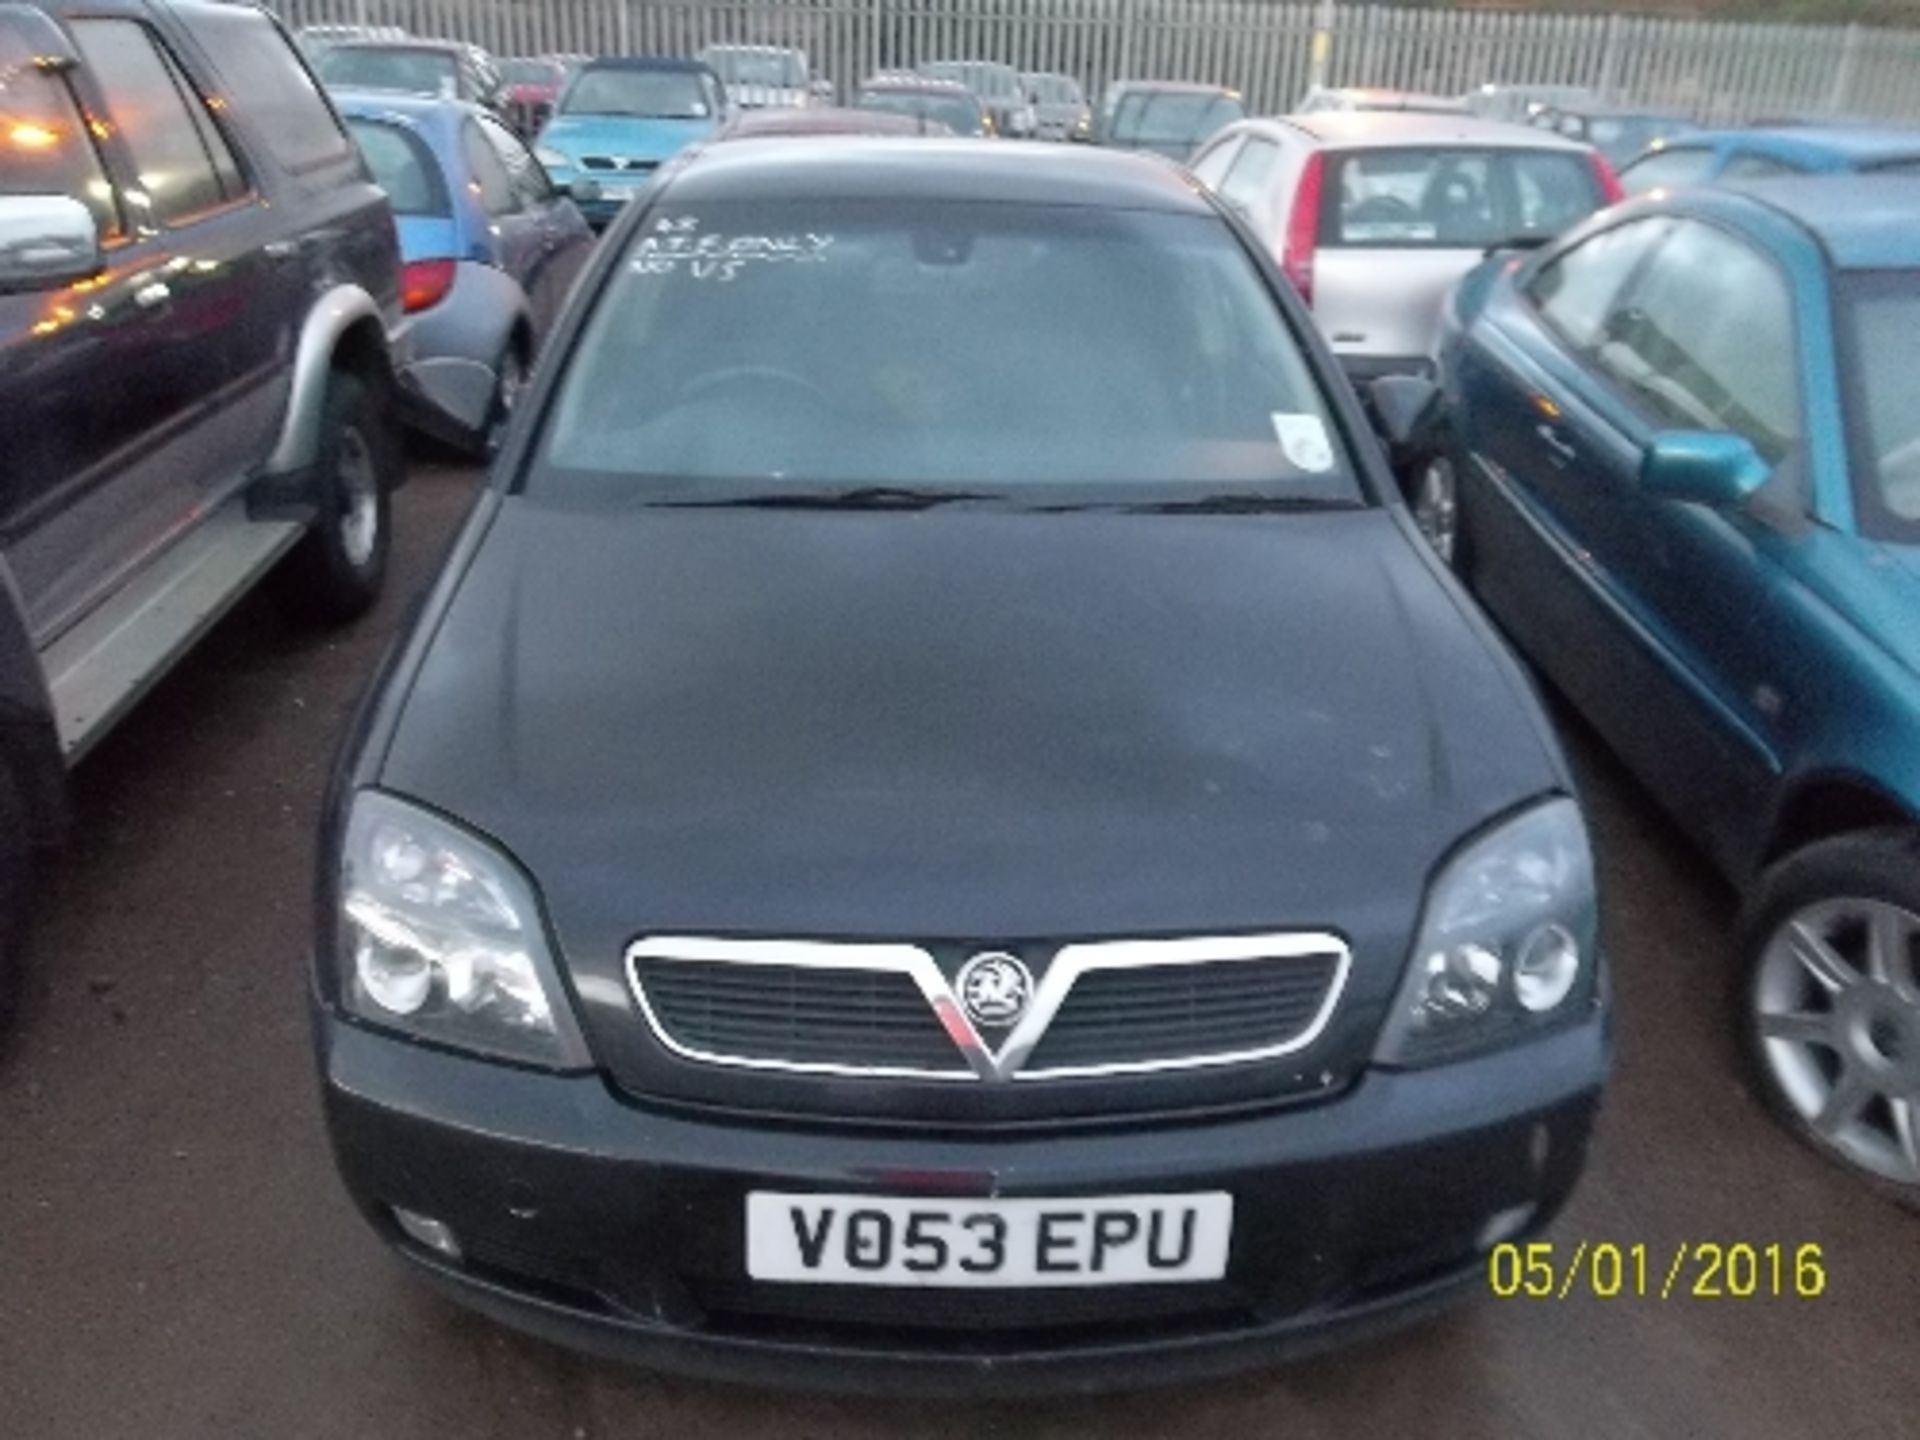 Vauxhall Vectra SXI DTI 16V - VO53 EPU This vehicle may be purchased only by the holder of an ATF